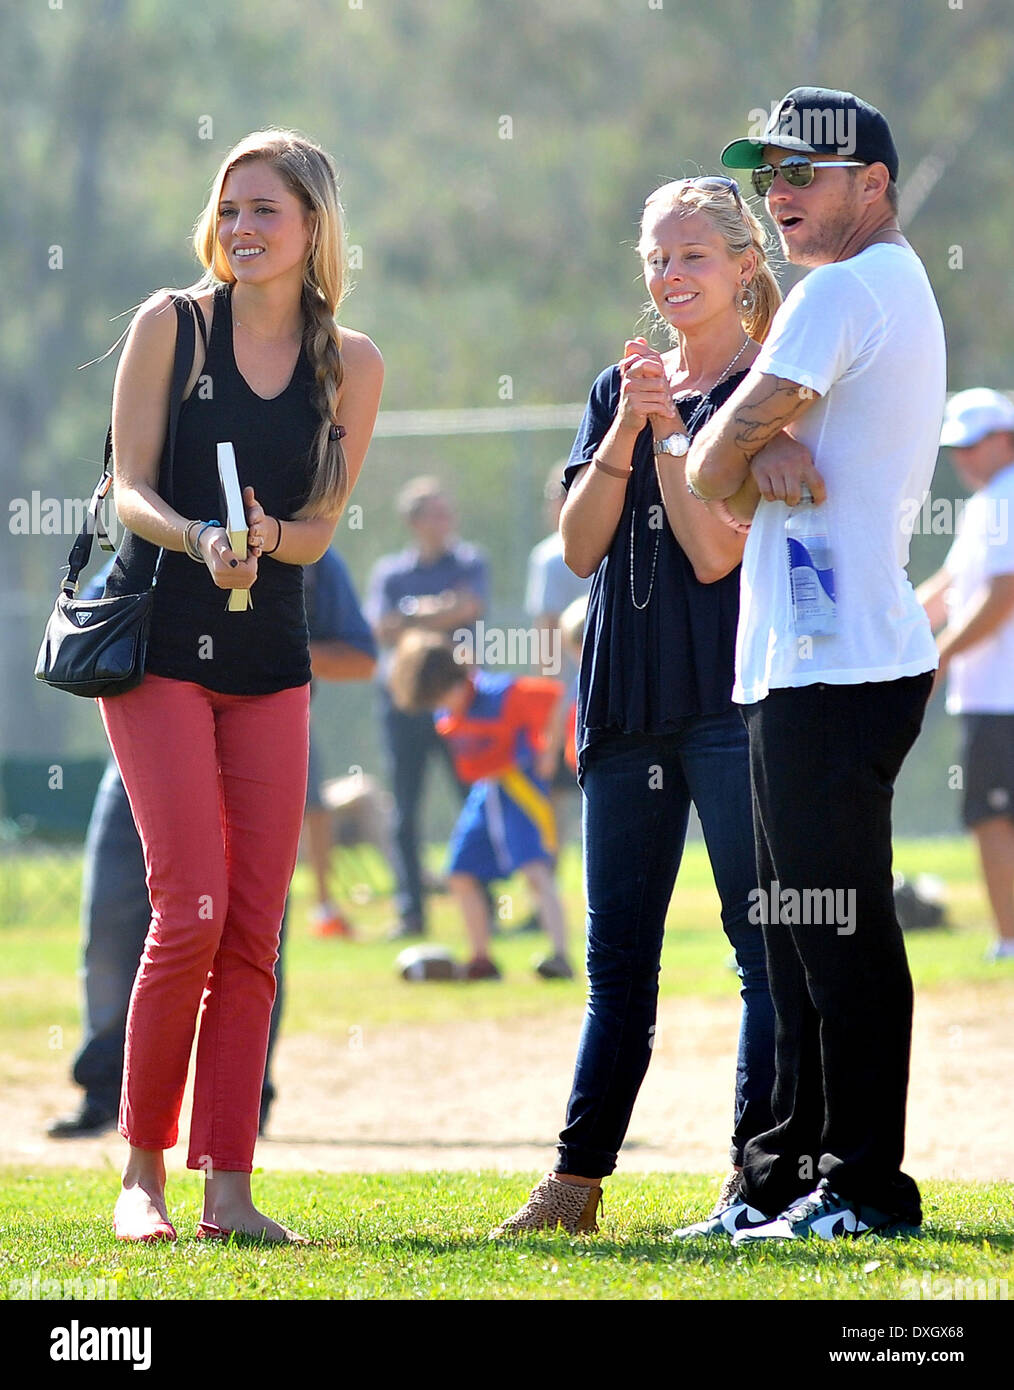 Paulina Slagter, Ryan Phillippe Ryan Phillippe at a park in Brentwood with his girlfriend to watch his son's soccer game Los Angeles, California - 03.11.12 Featuring: Paulina Slagter,Ryan Phillippe When: 03 Nov 2012 Stock Photo